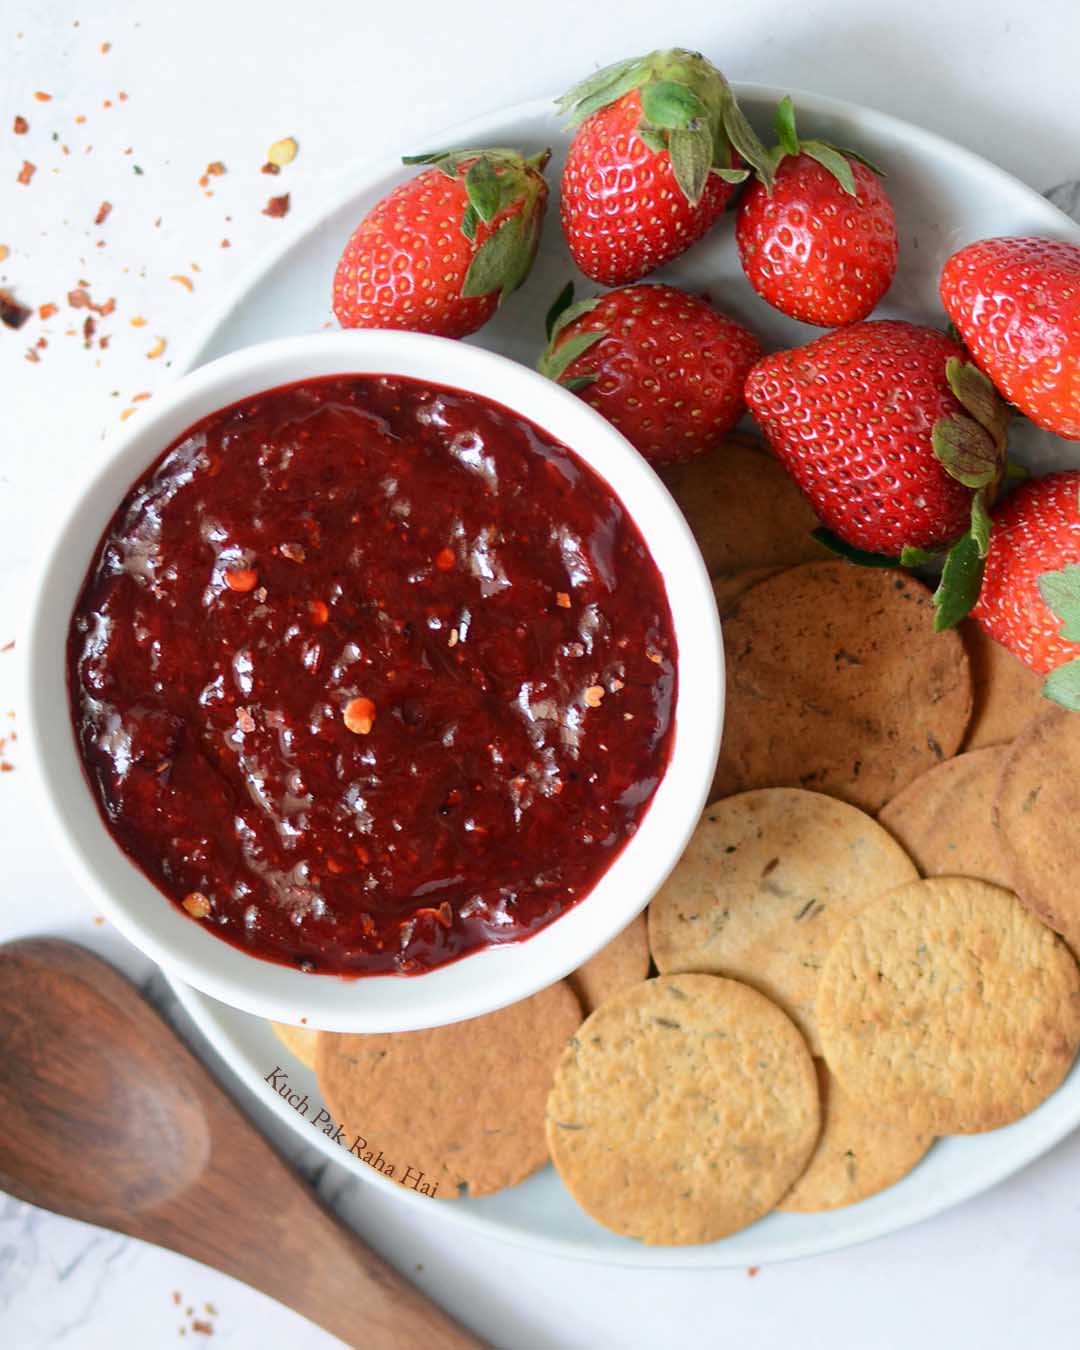 Strawberry Chutney serving ideas with crackers